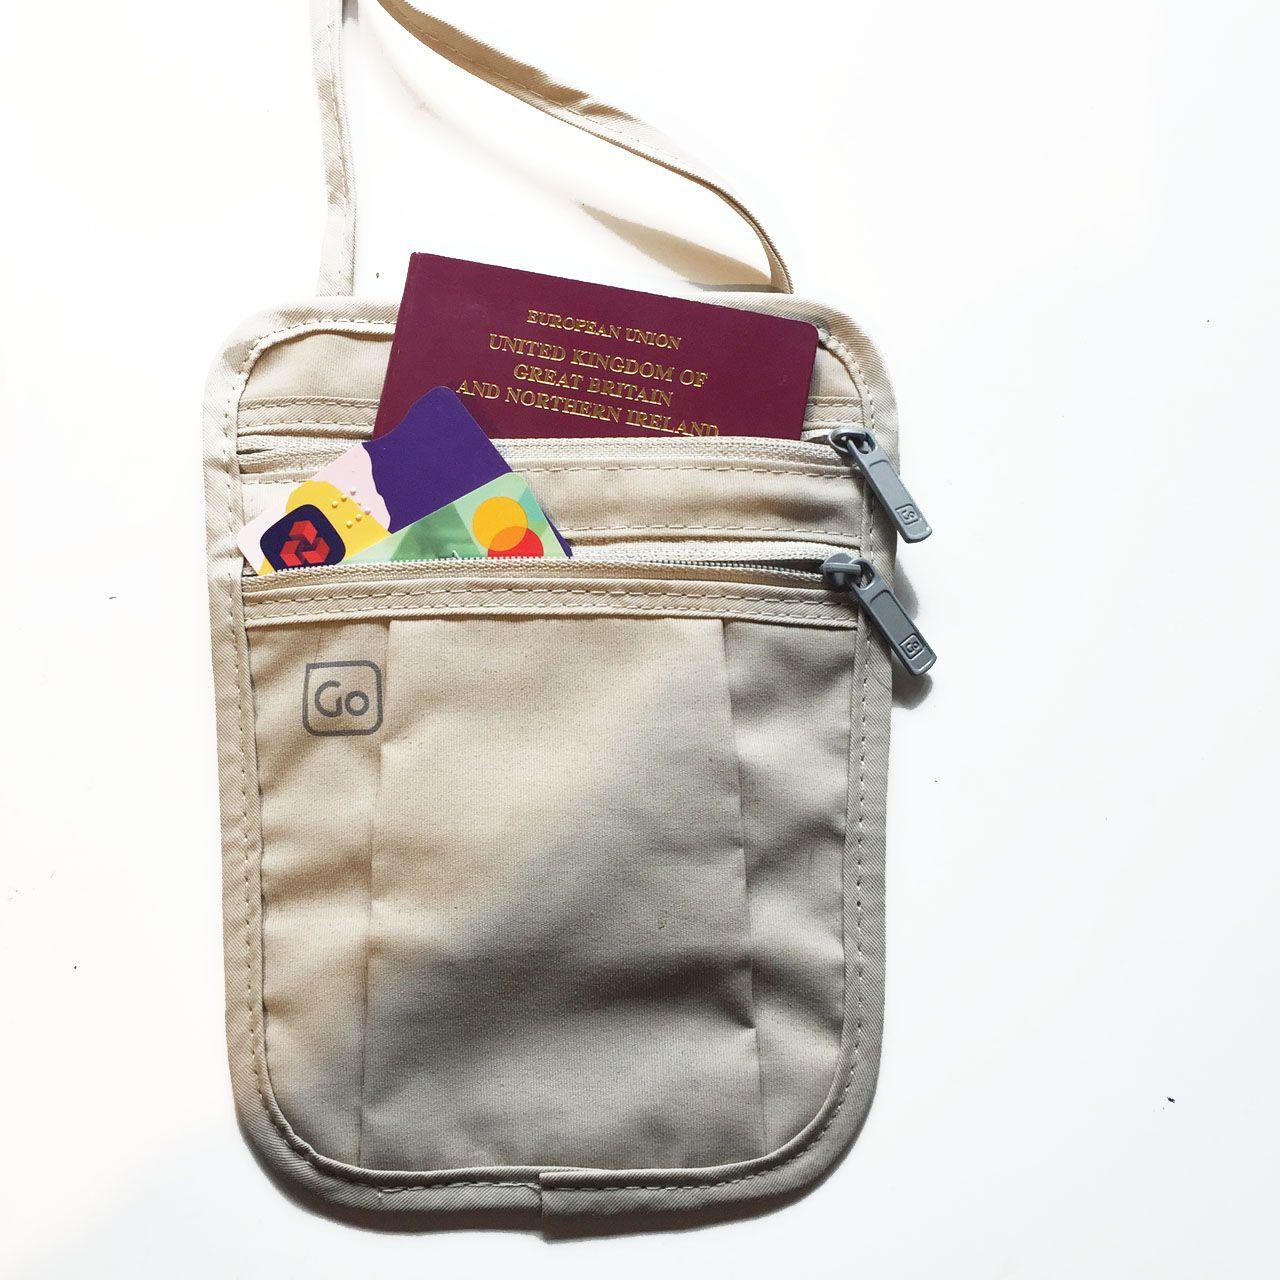 RFID Protected  Passport and Card Travel Bag